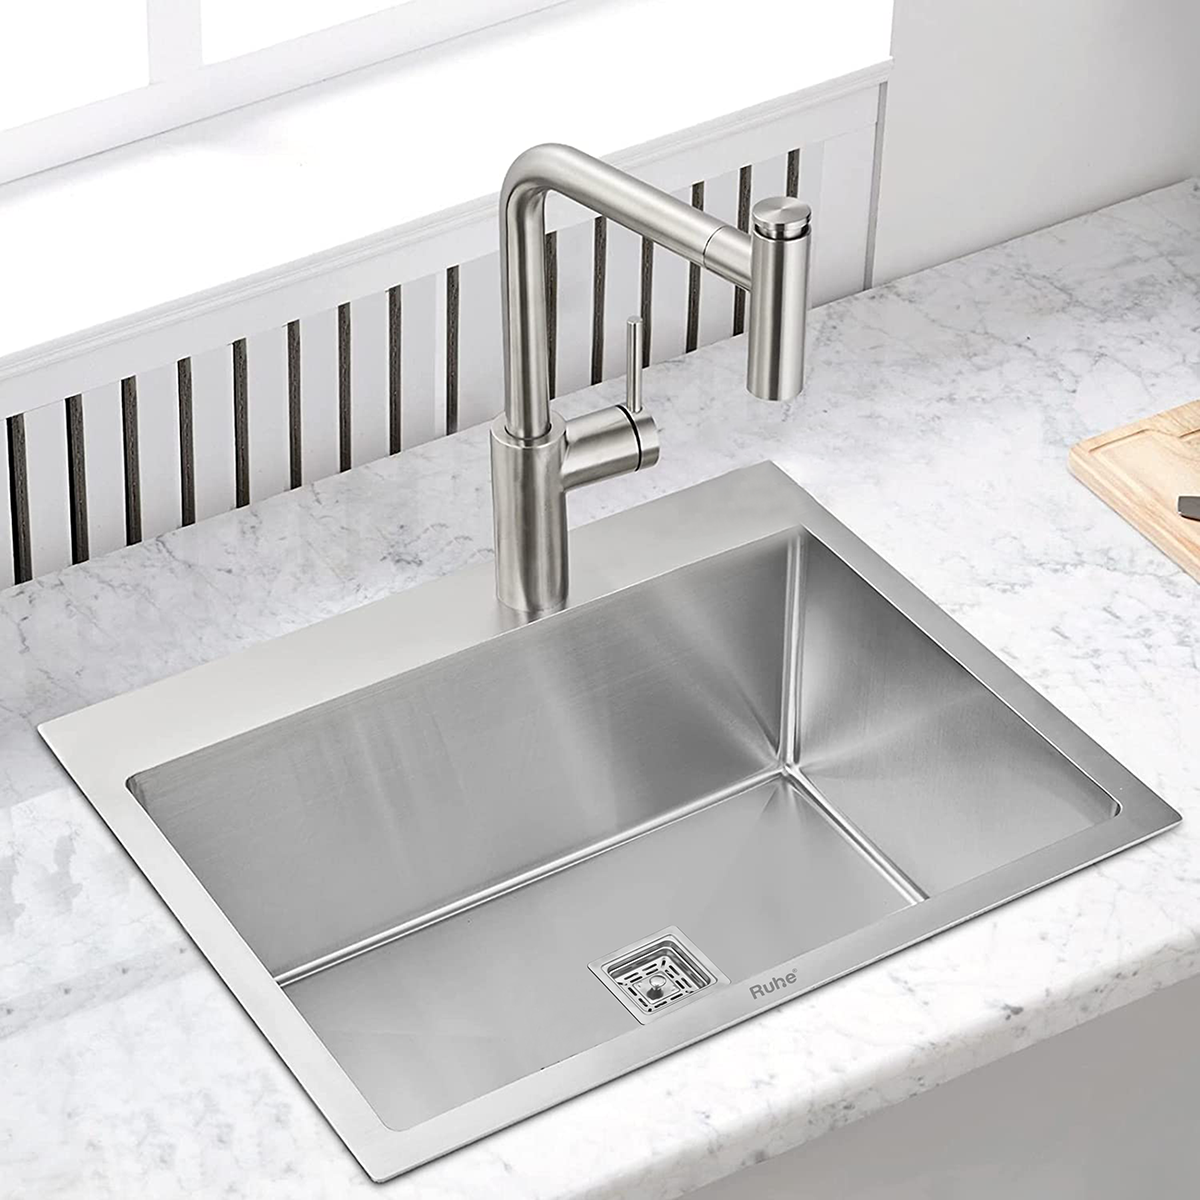 Handmade Single Bowl 304-Grade Kitchen Sink (24 x 18 x 10 Inches) with Tap Hole installed